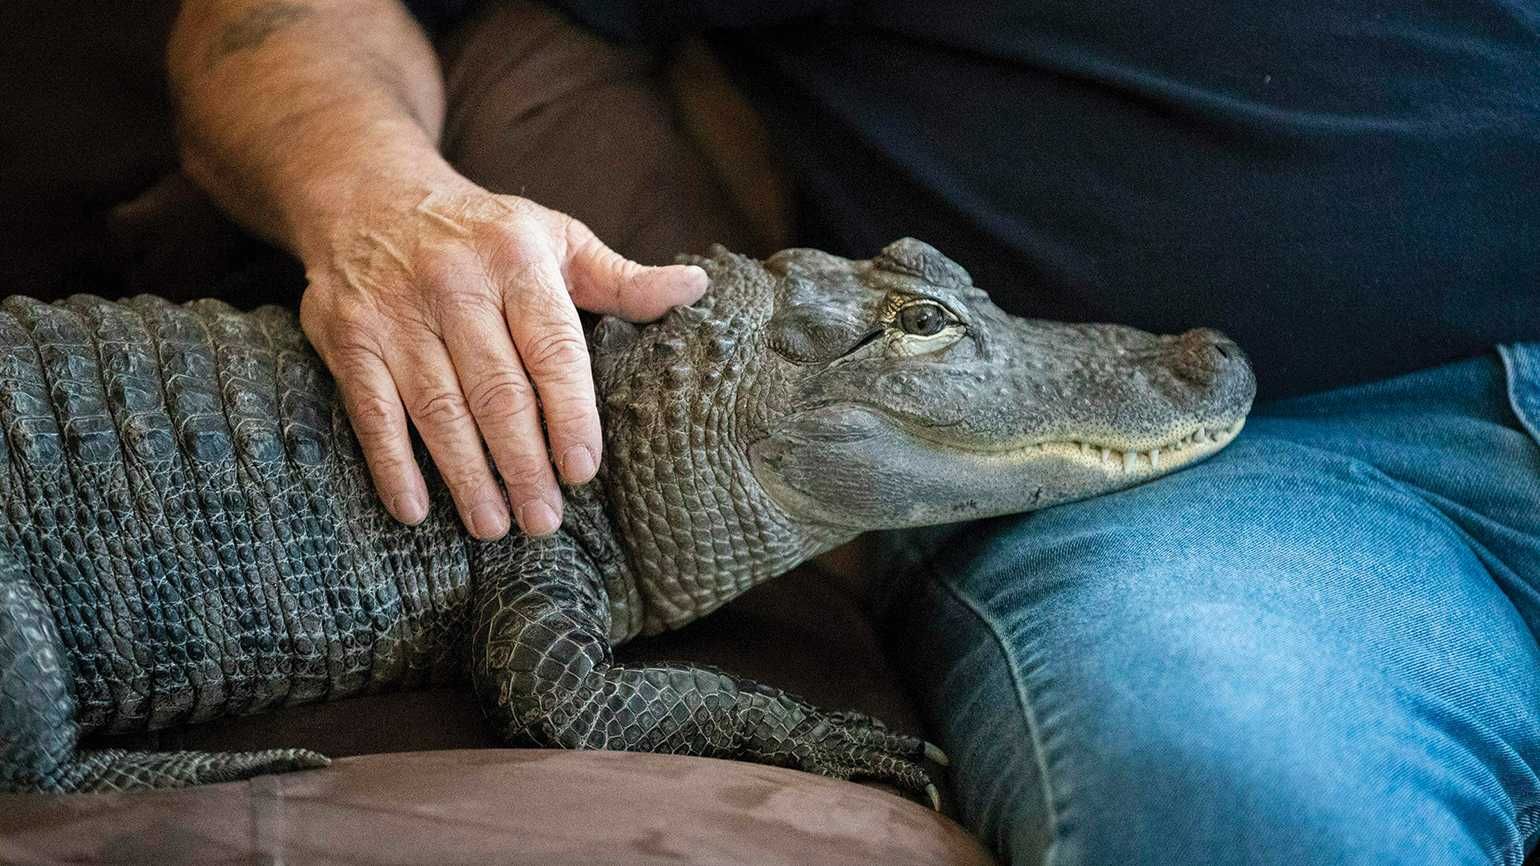 Wally the alligator sits on lap in inspiring stories of animals helping humans